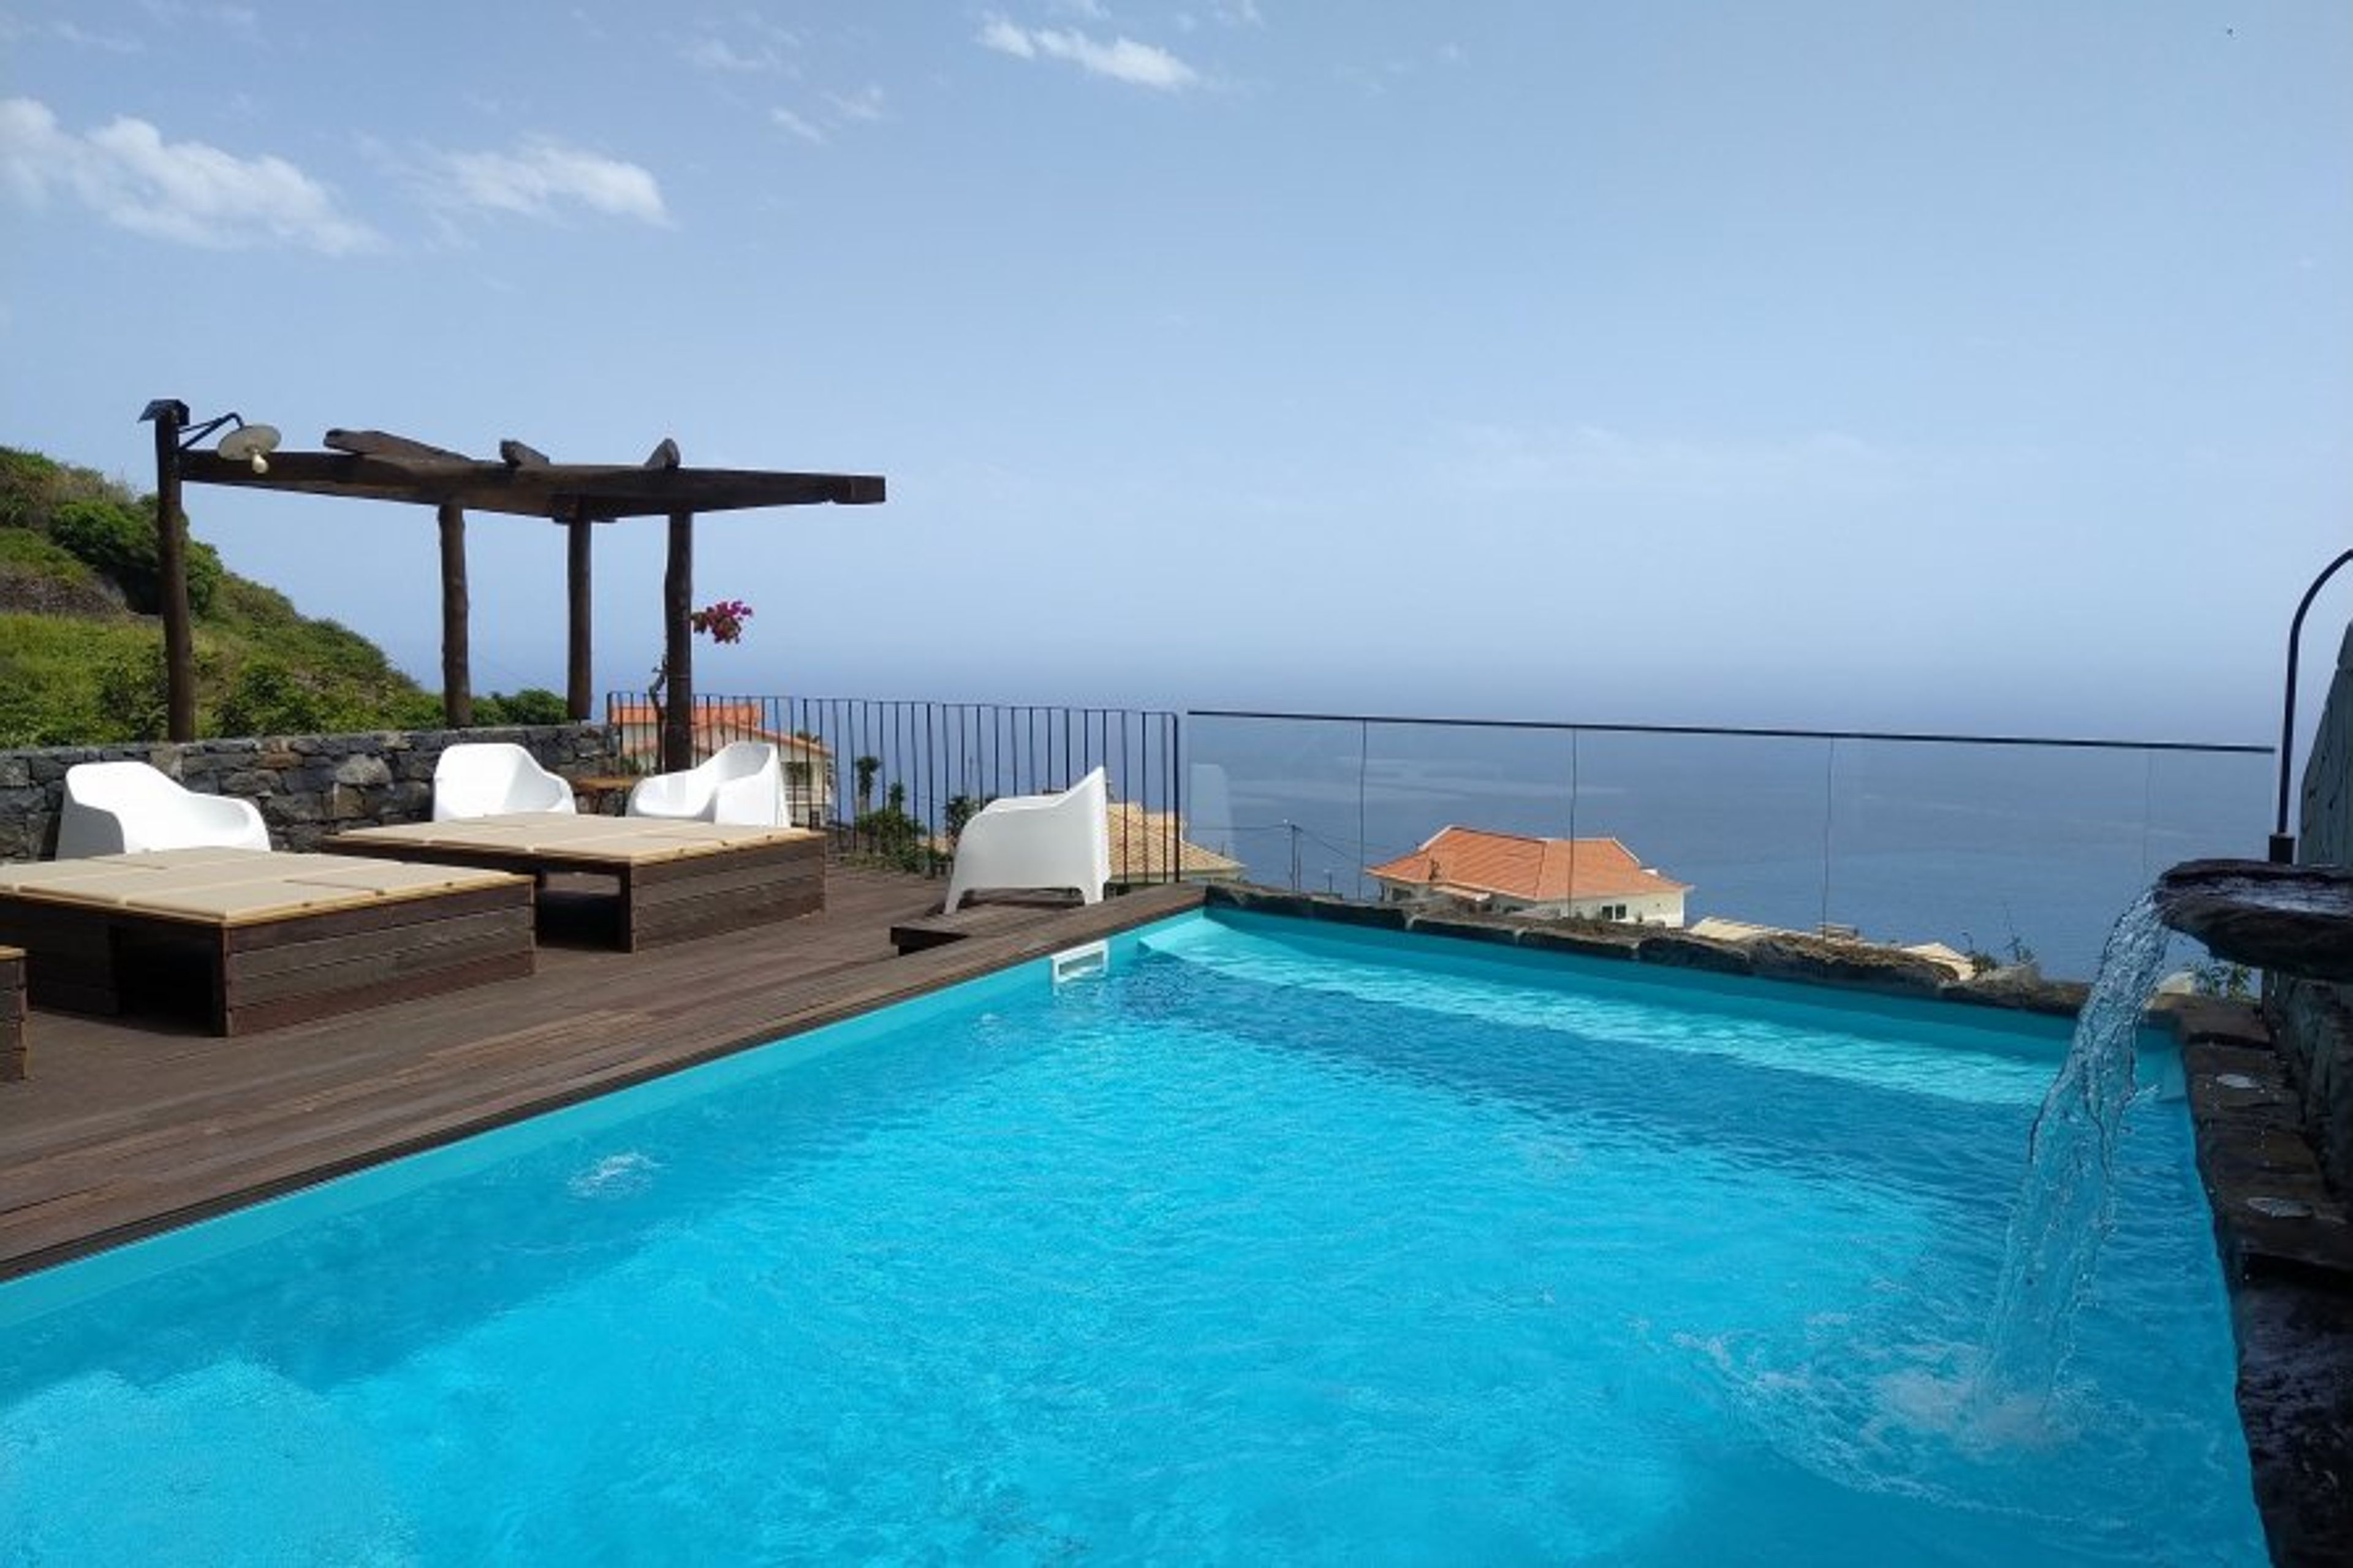 Swimming pool with a view